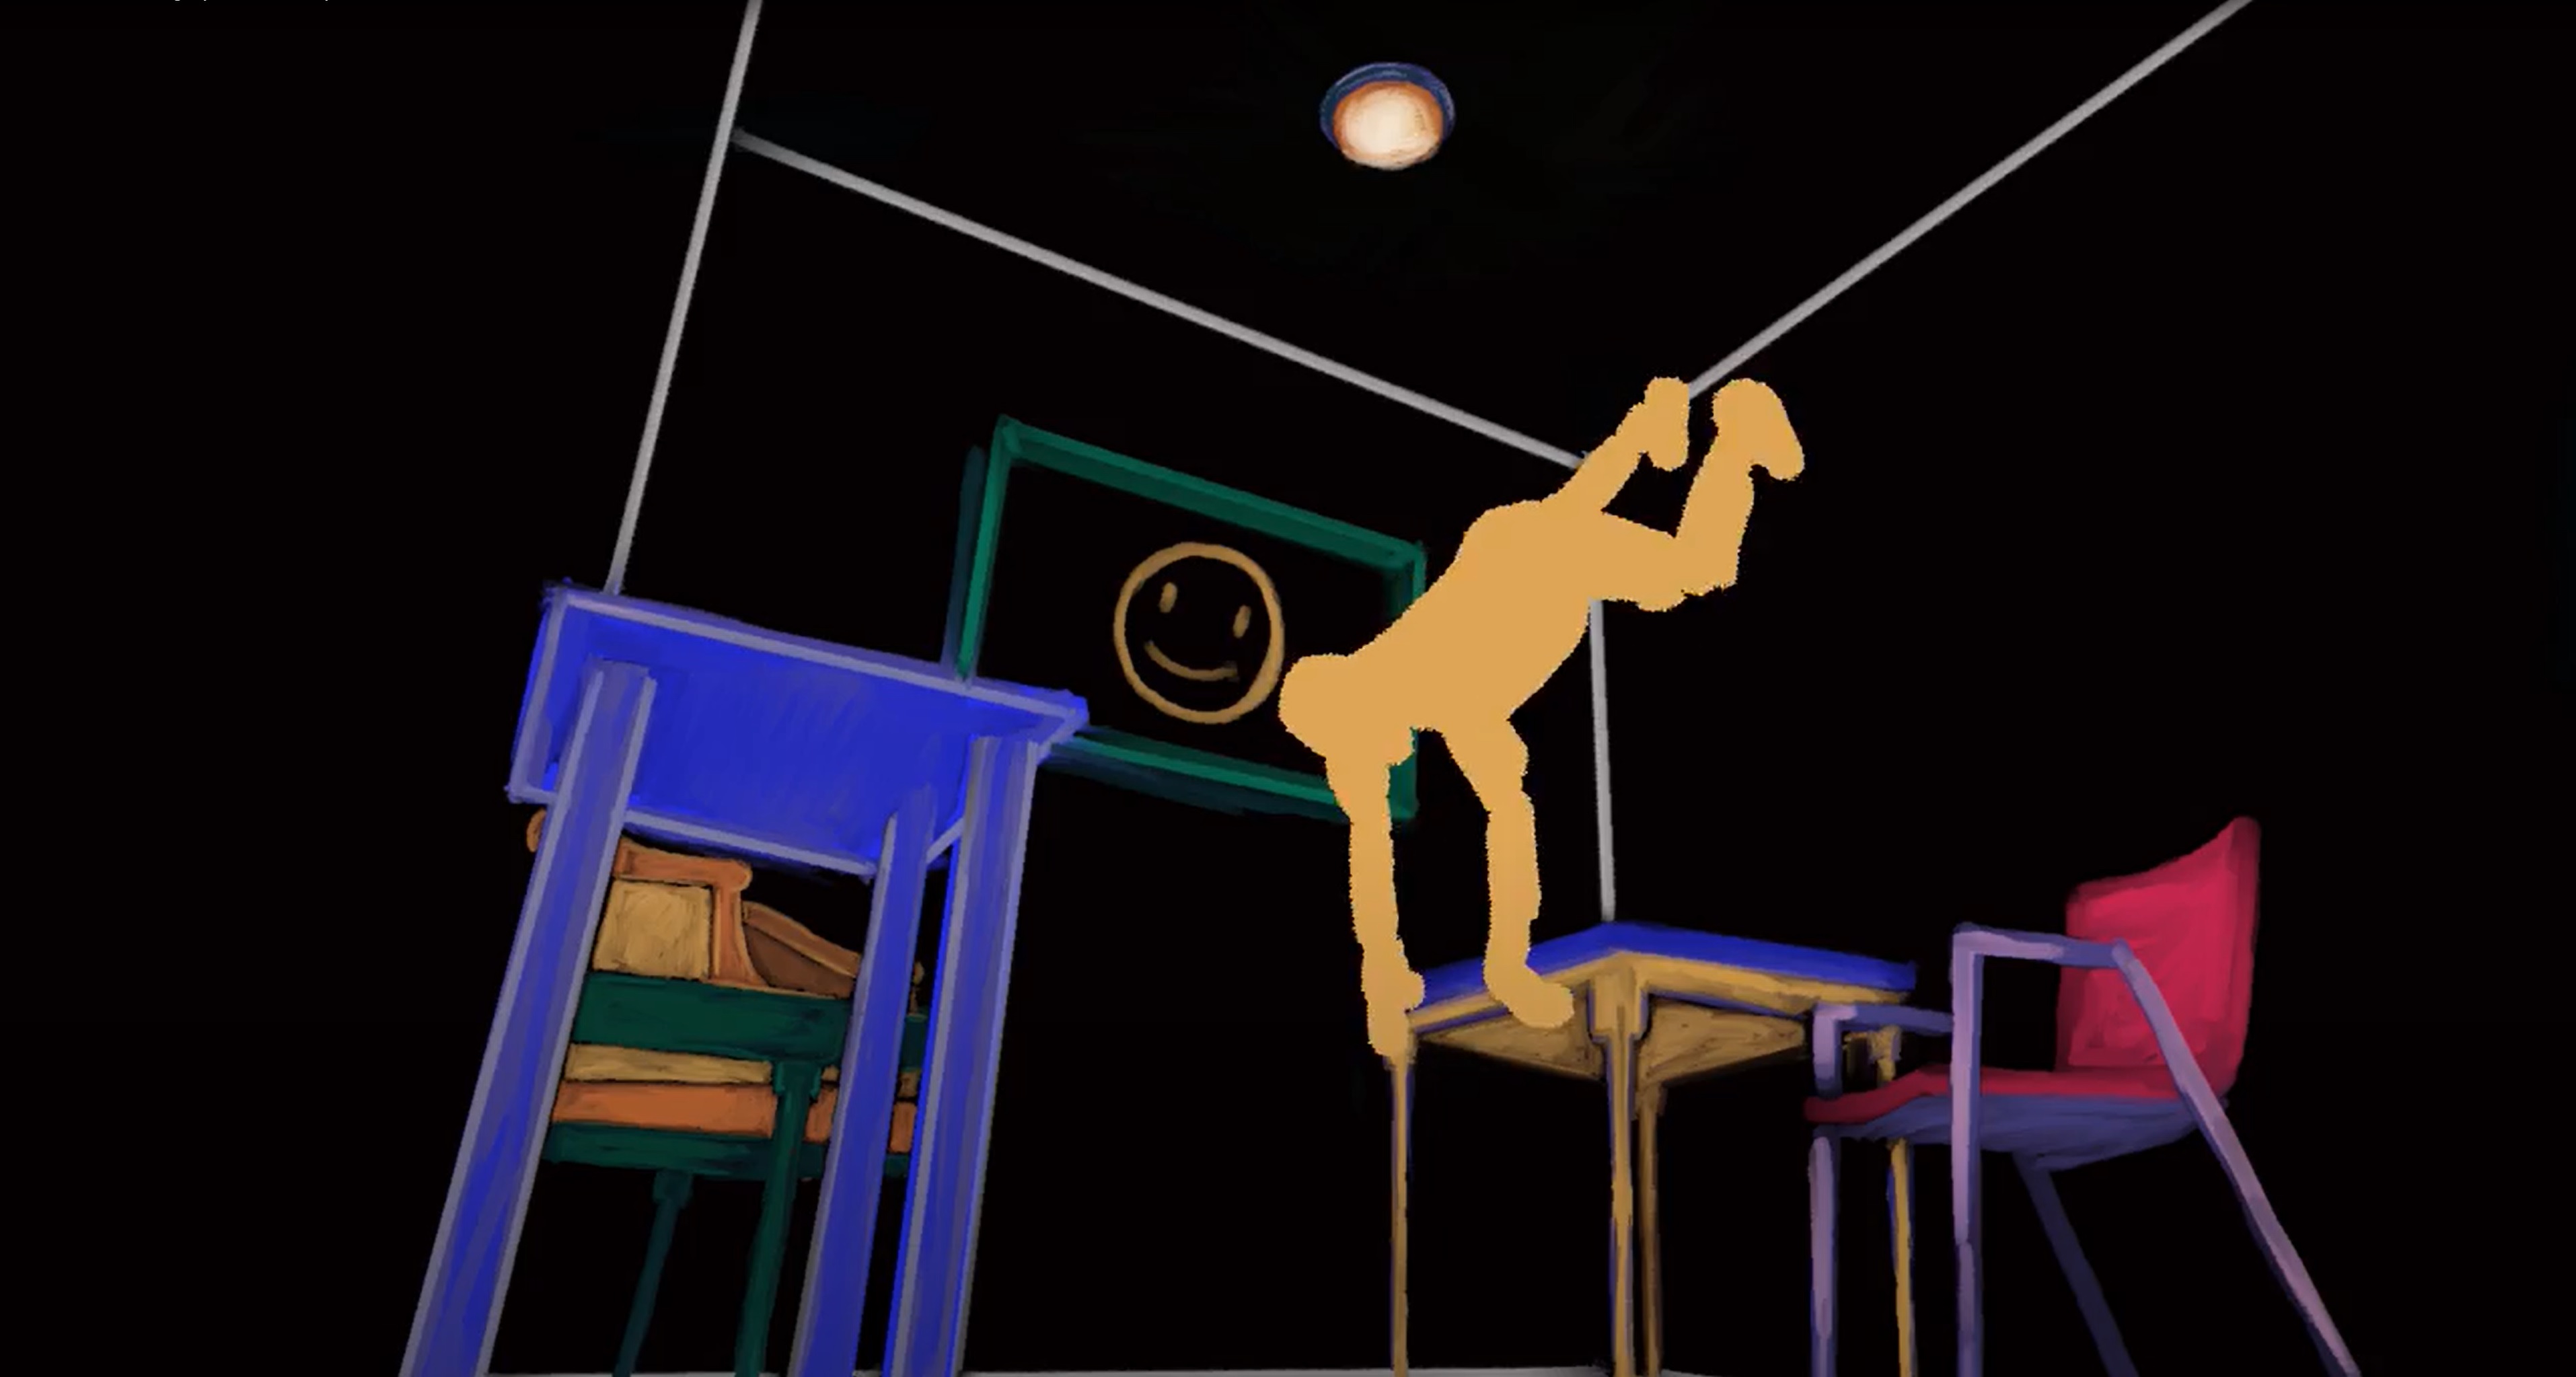 illustration of a person hanging from a desk in a small room as if gravity is upside-down for the person and not the furniture